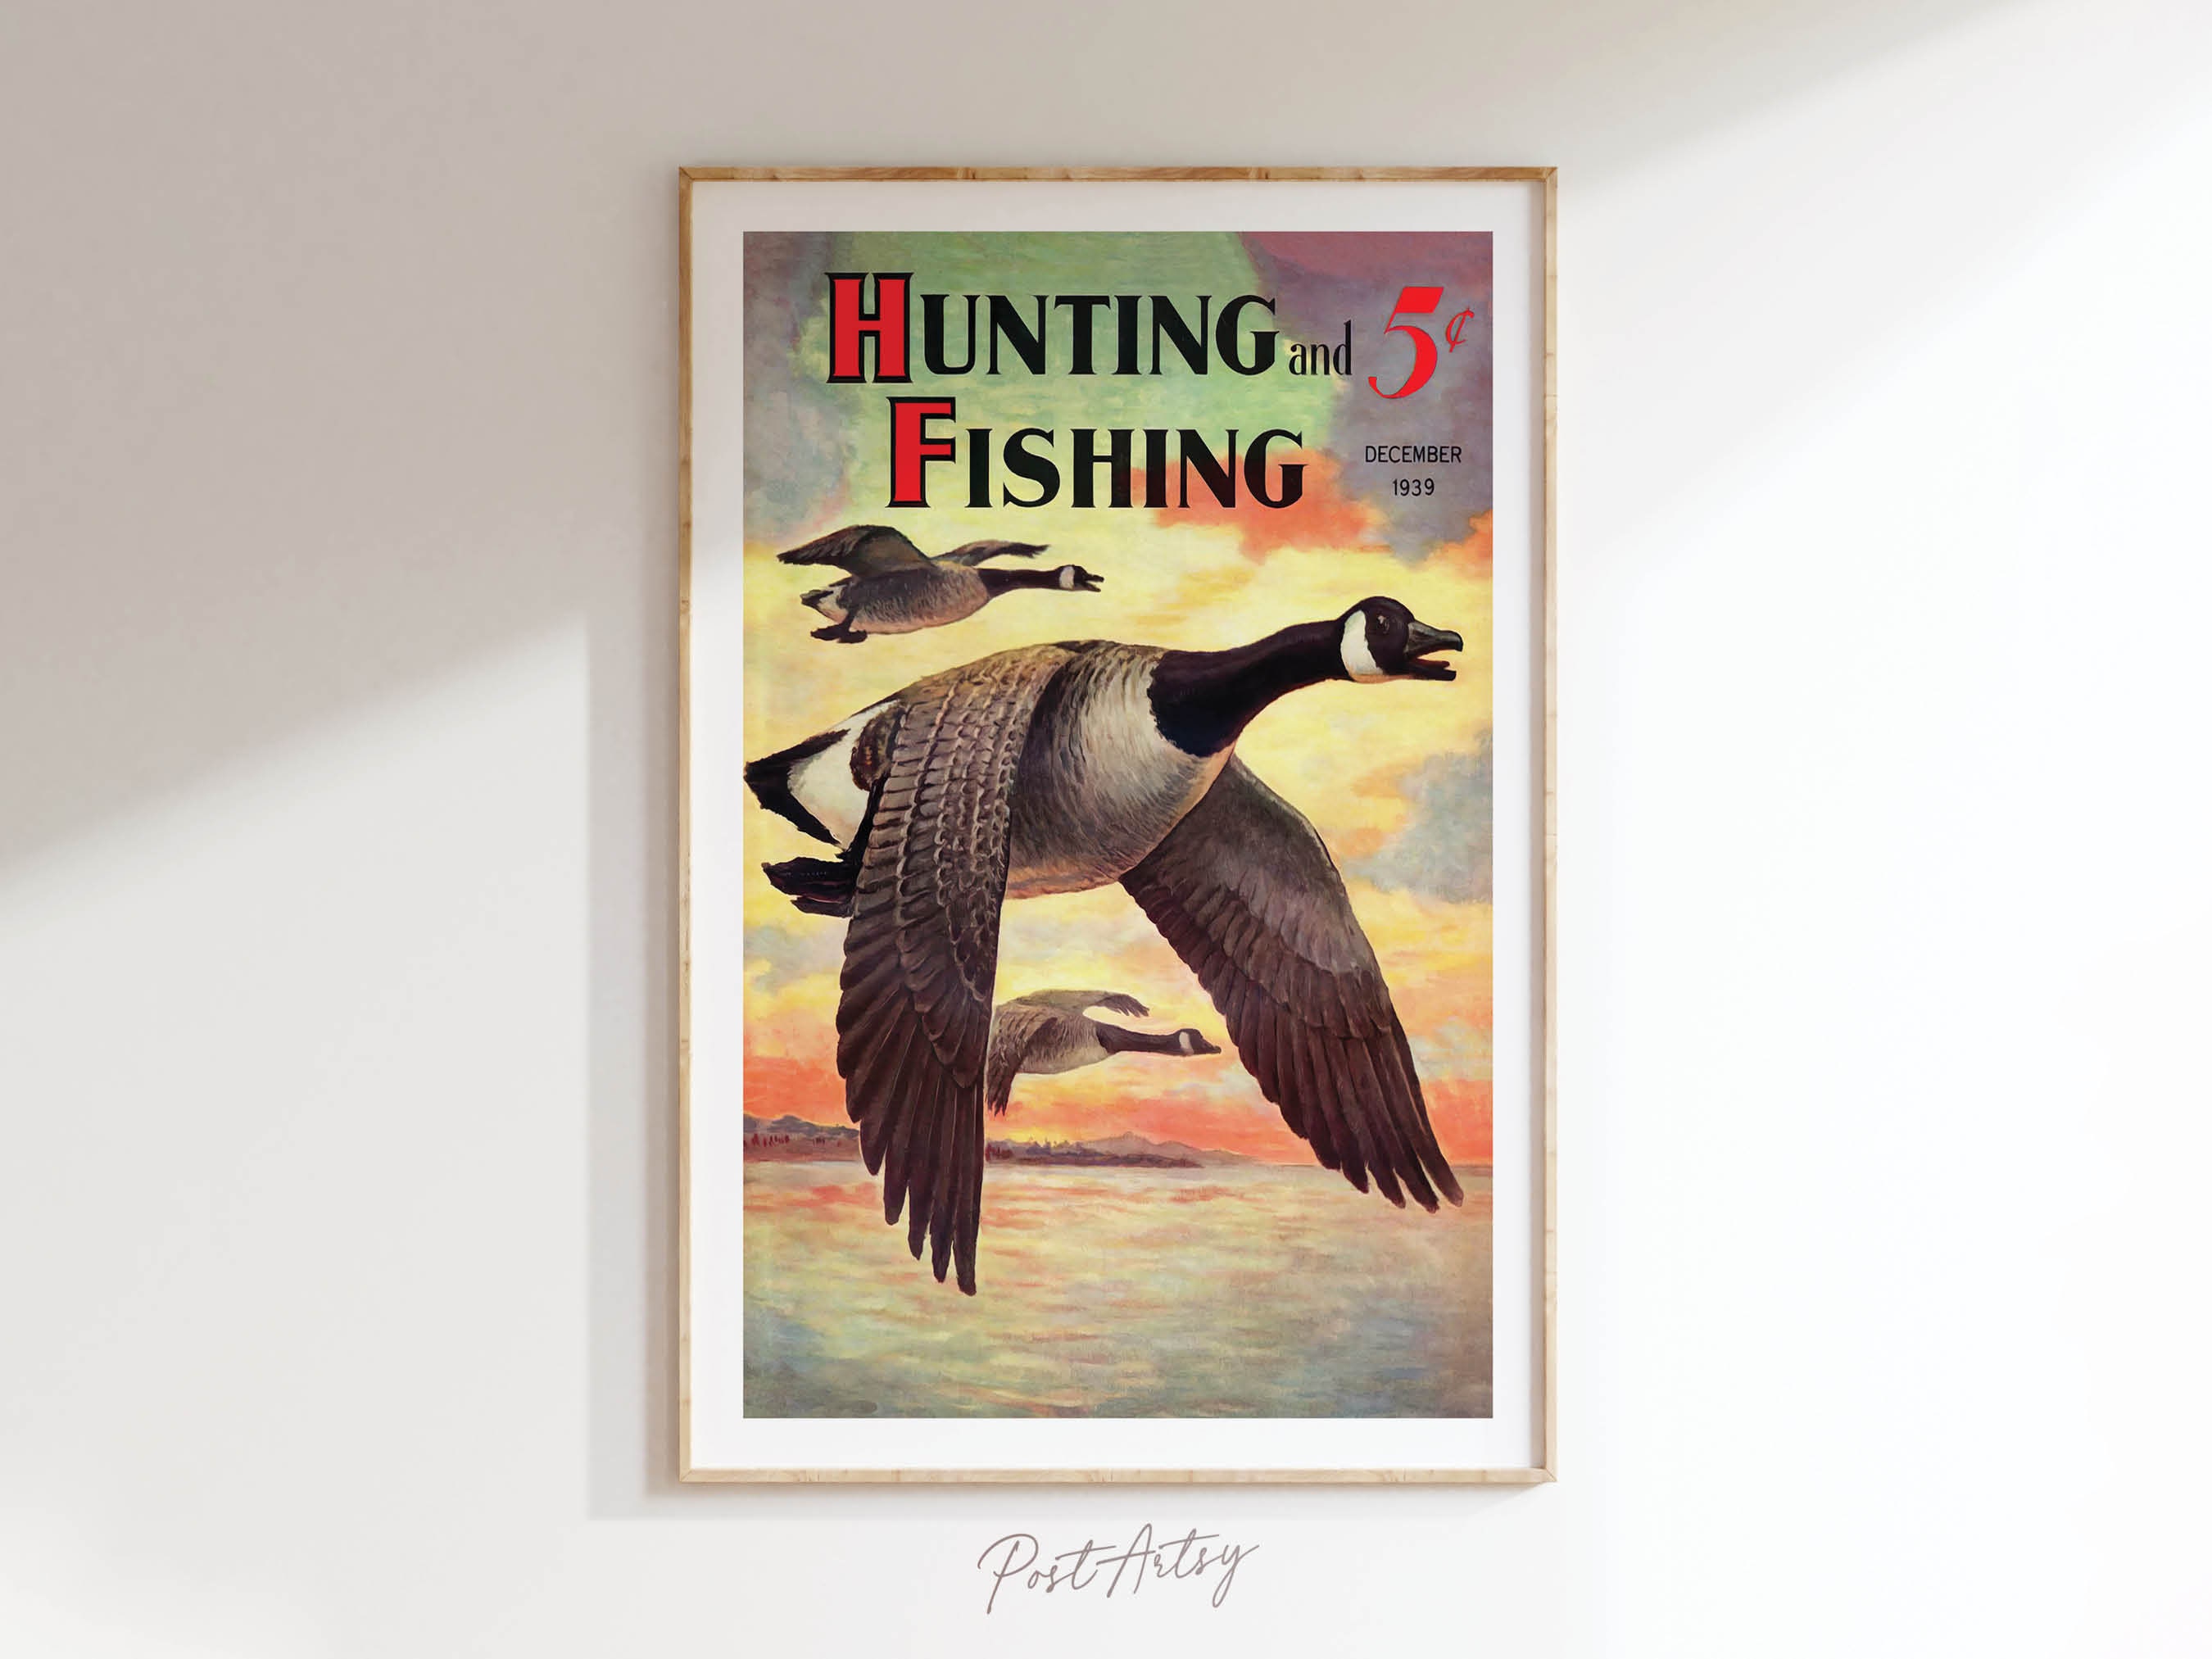 Vintage Hunting Fishing Poster Retro Outdoorsy Decor Travel Poster Print  Sports Recreation Rustic Cabin Wall Art Gift for Dad -  Canada